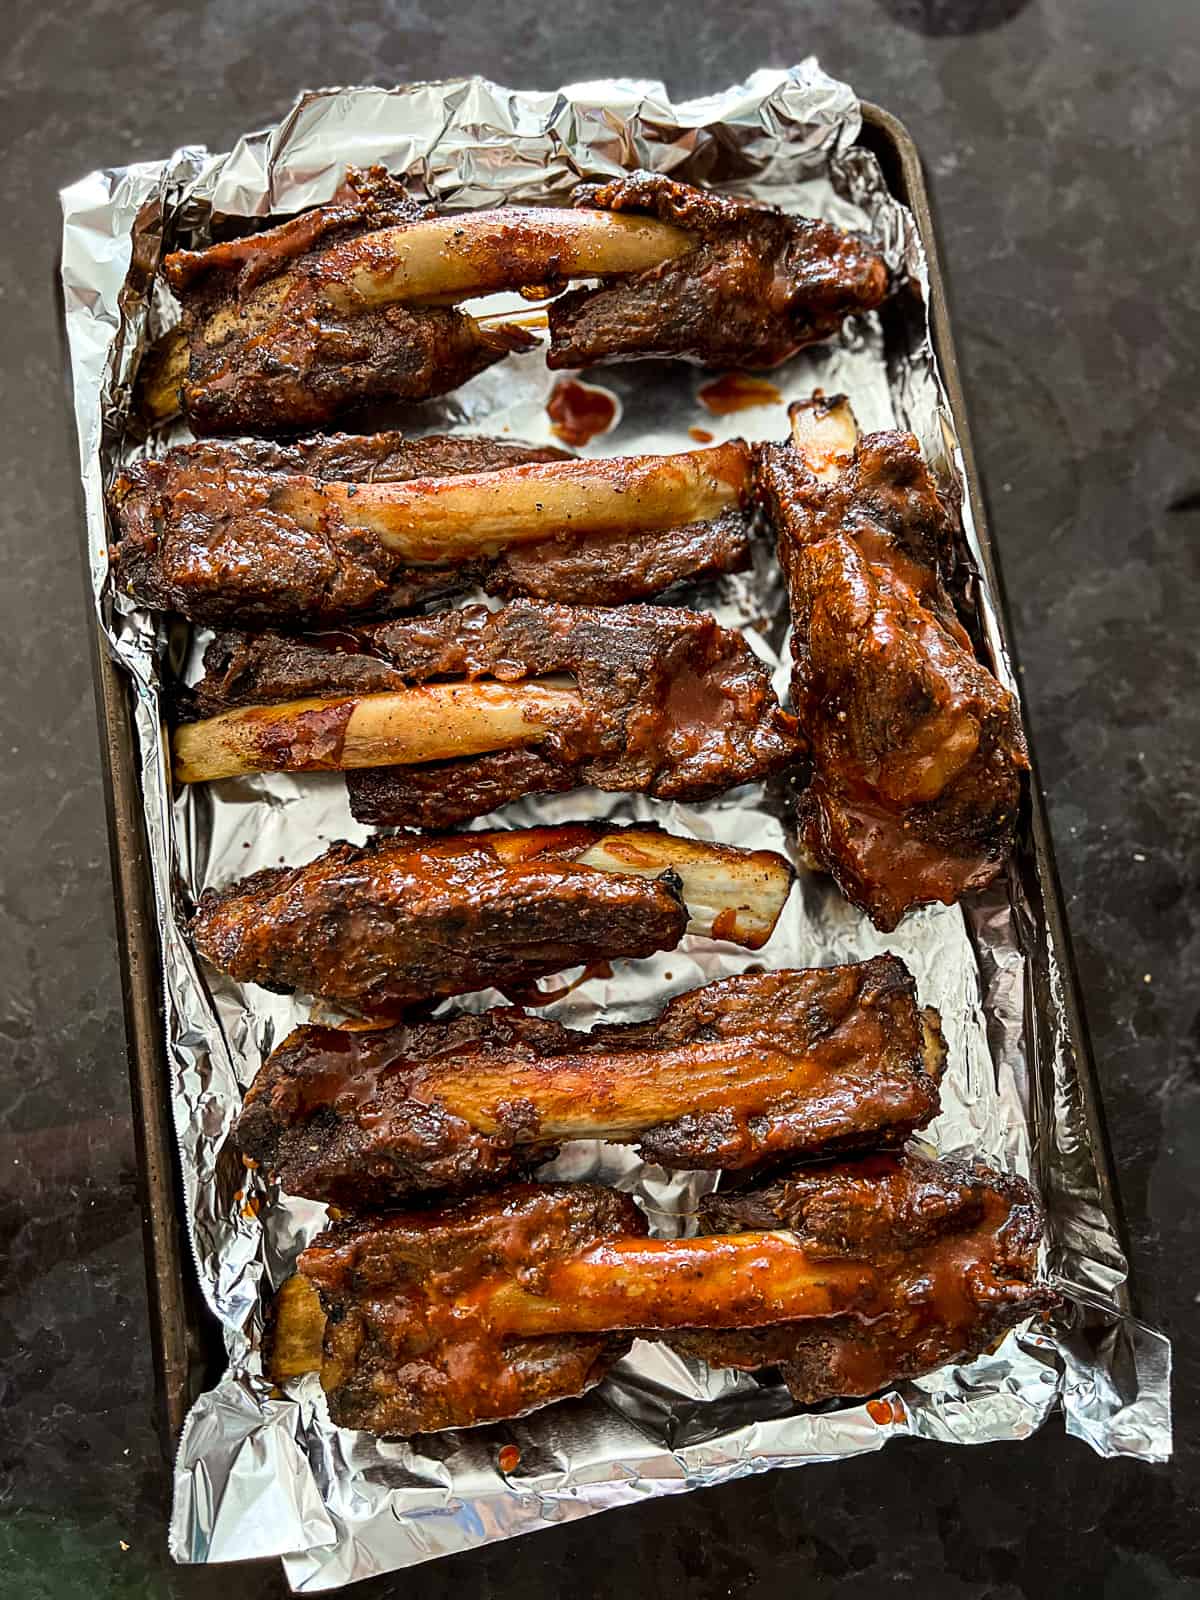 Baking Sheet With Beef Back Ribs cooked with BBQ sauce